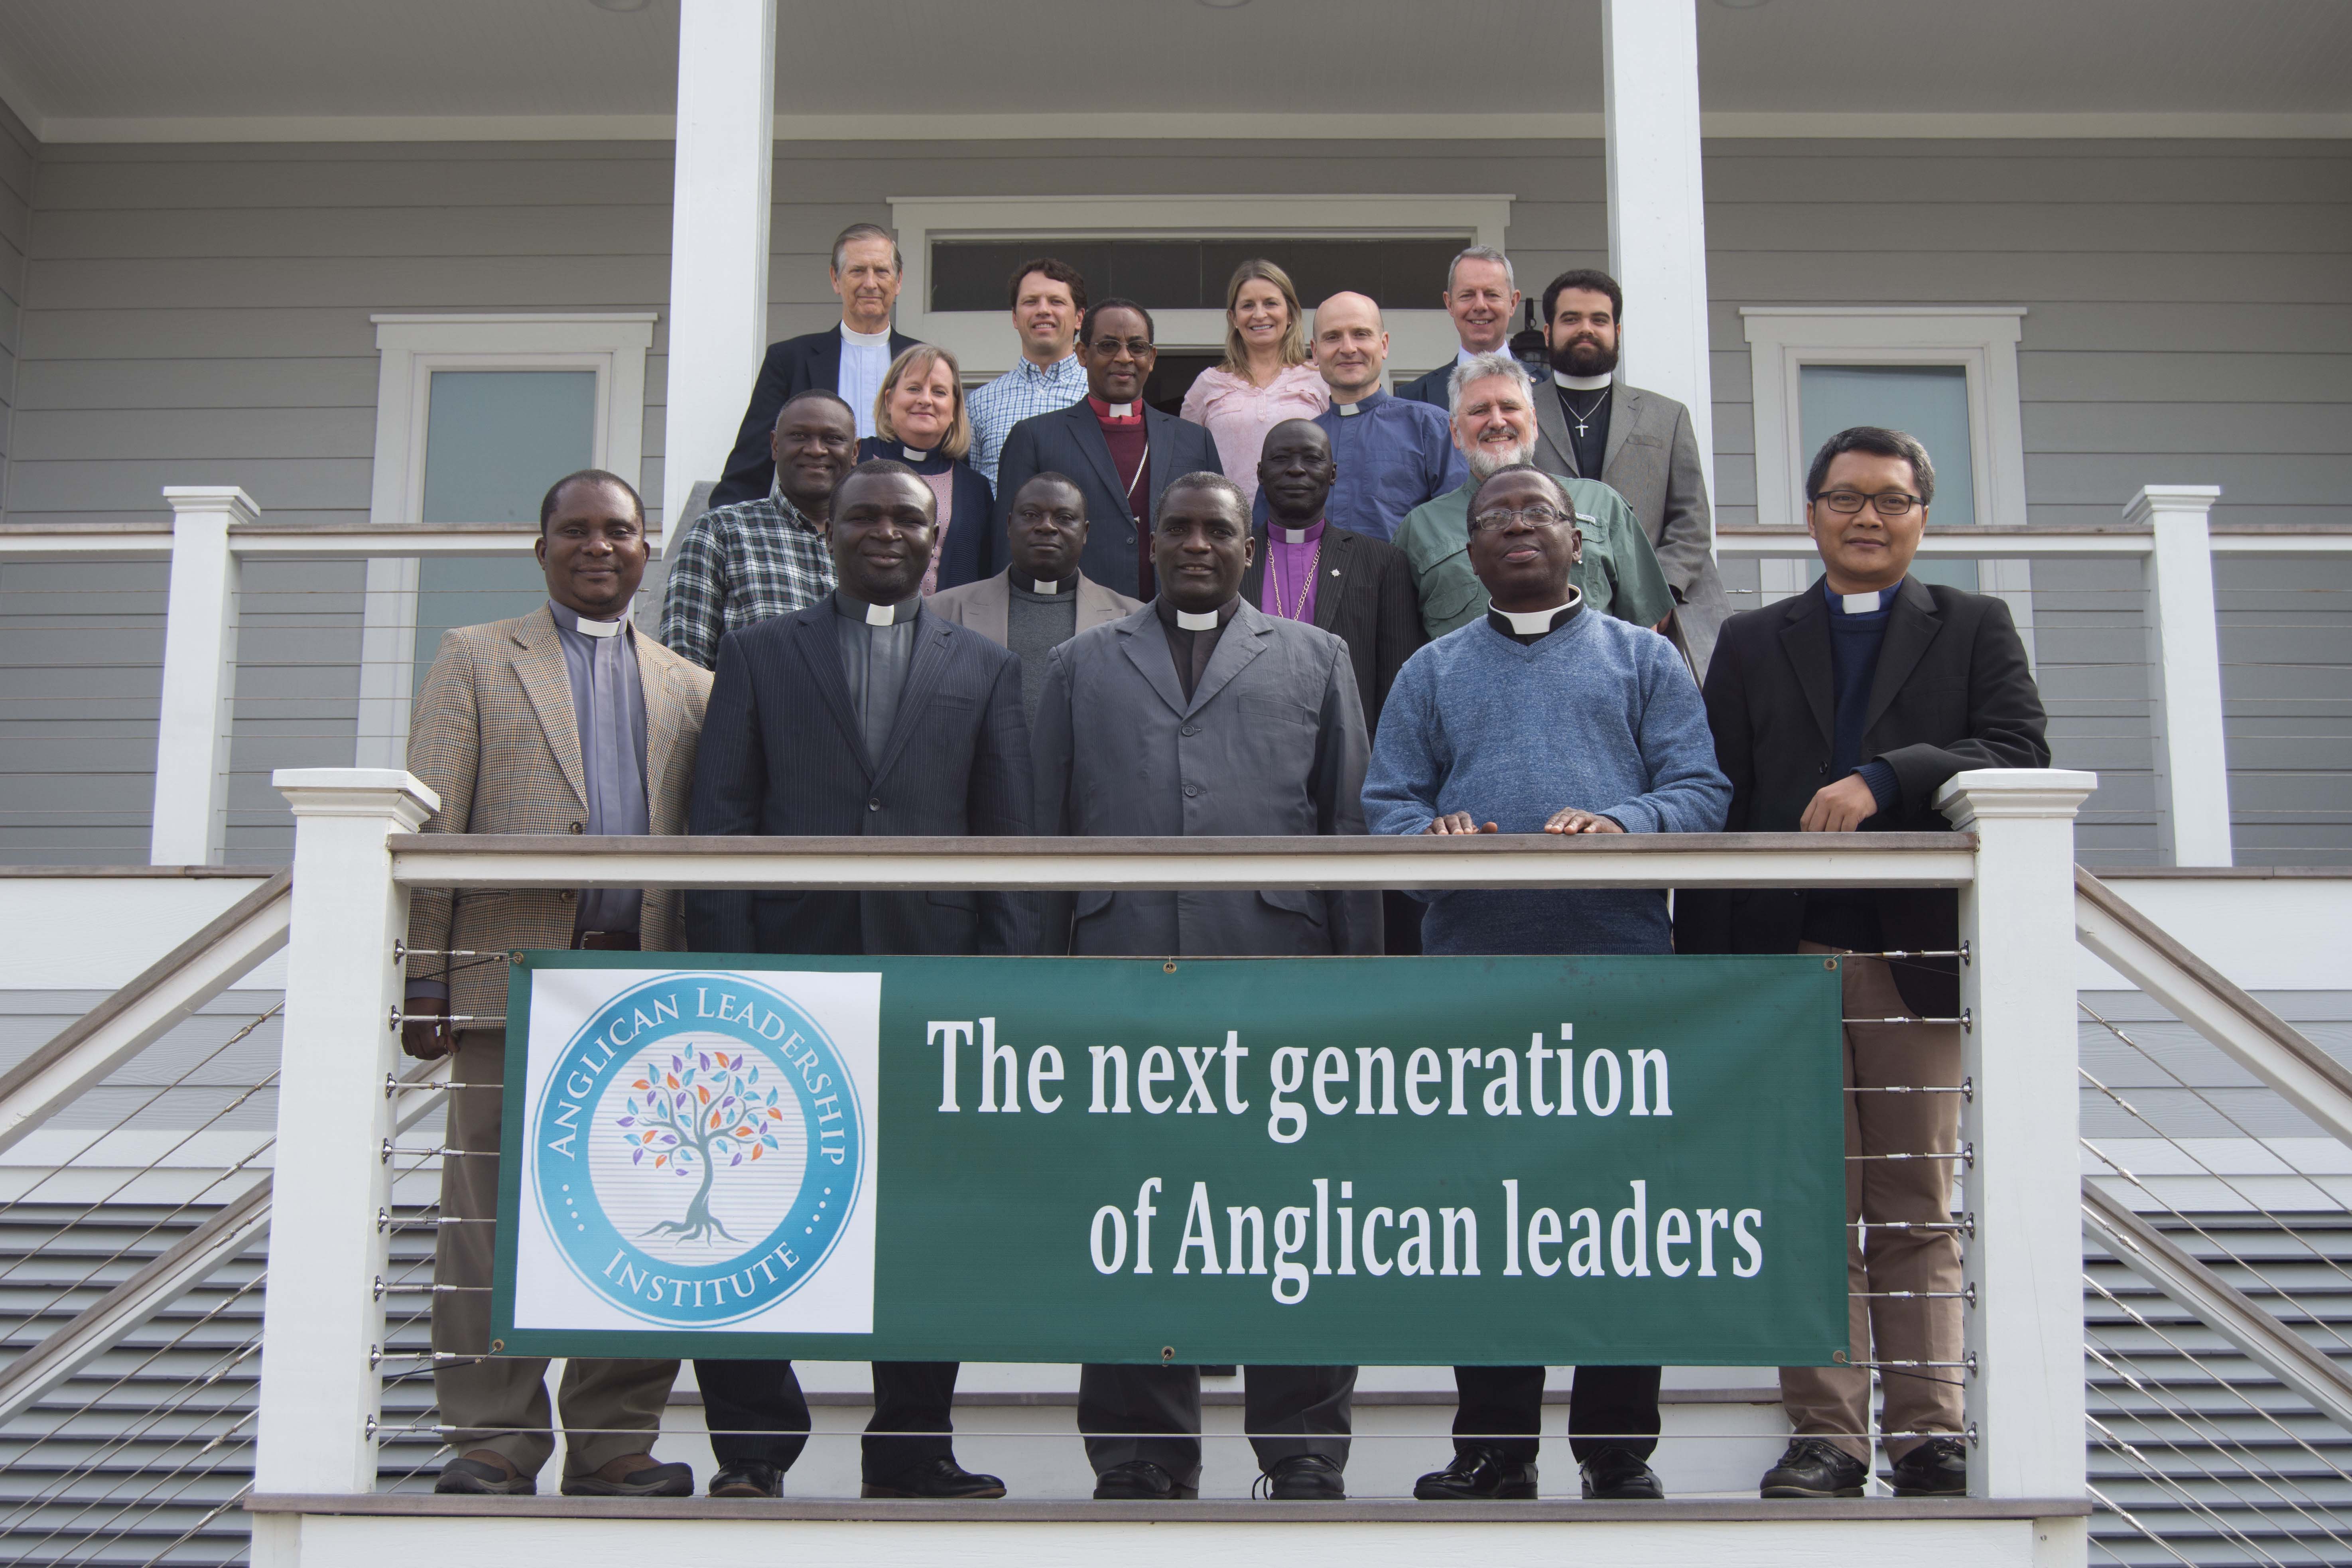 Participants in the Anglican Leadership Institute